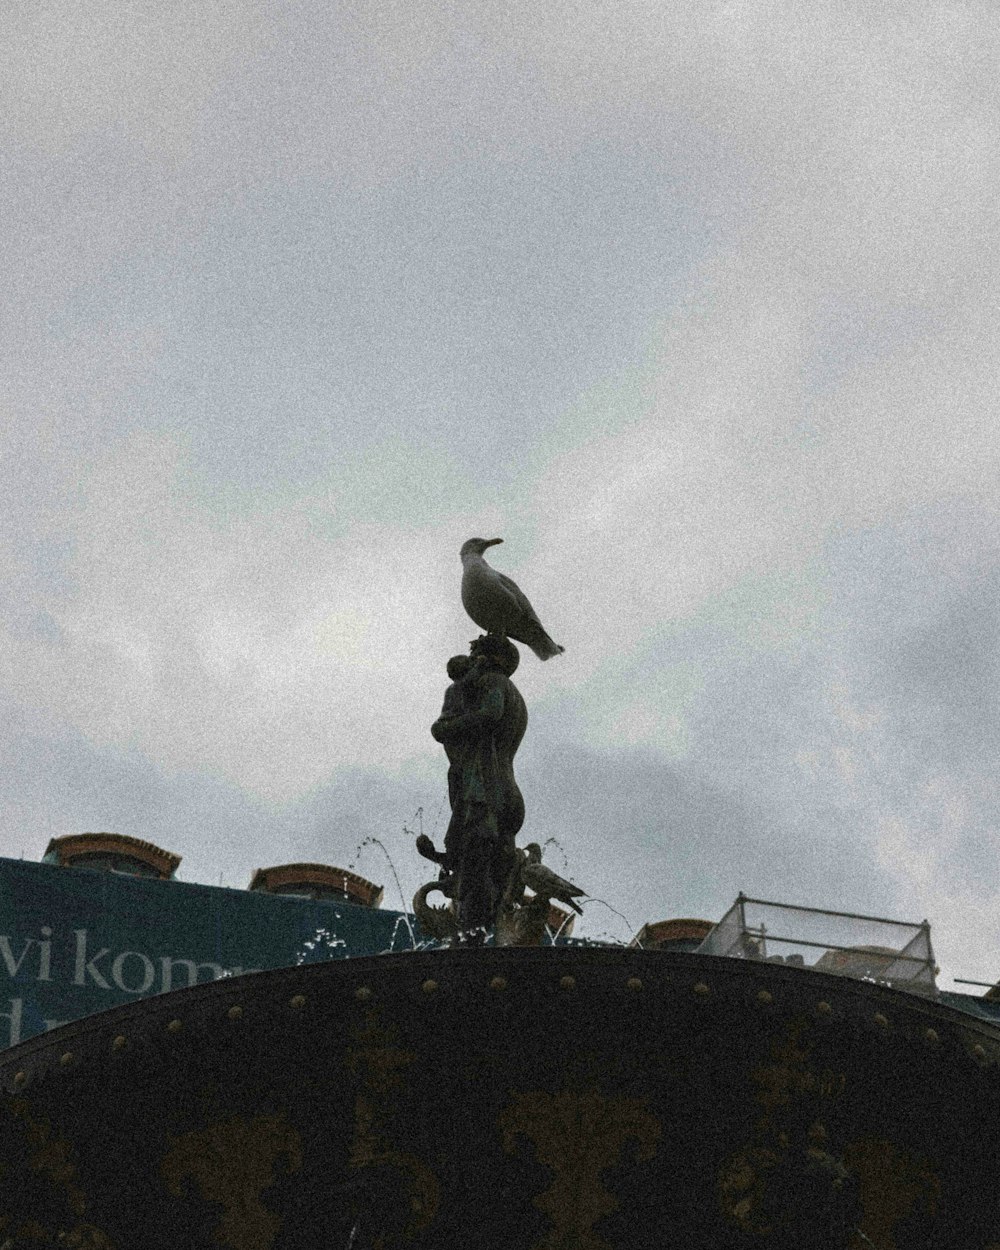 a bird is perched on top of a statue